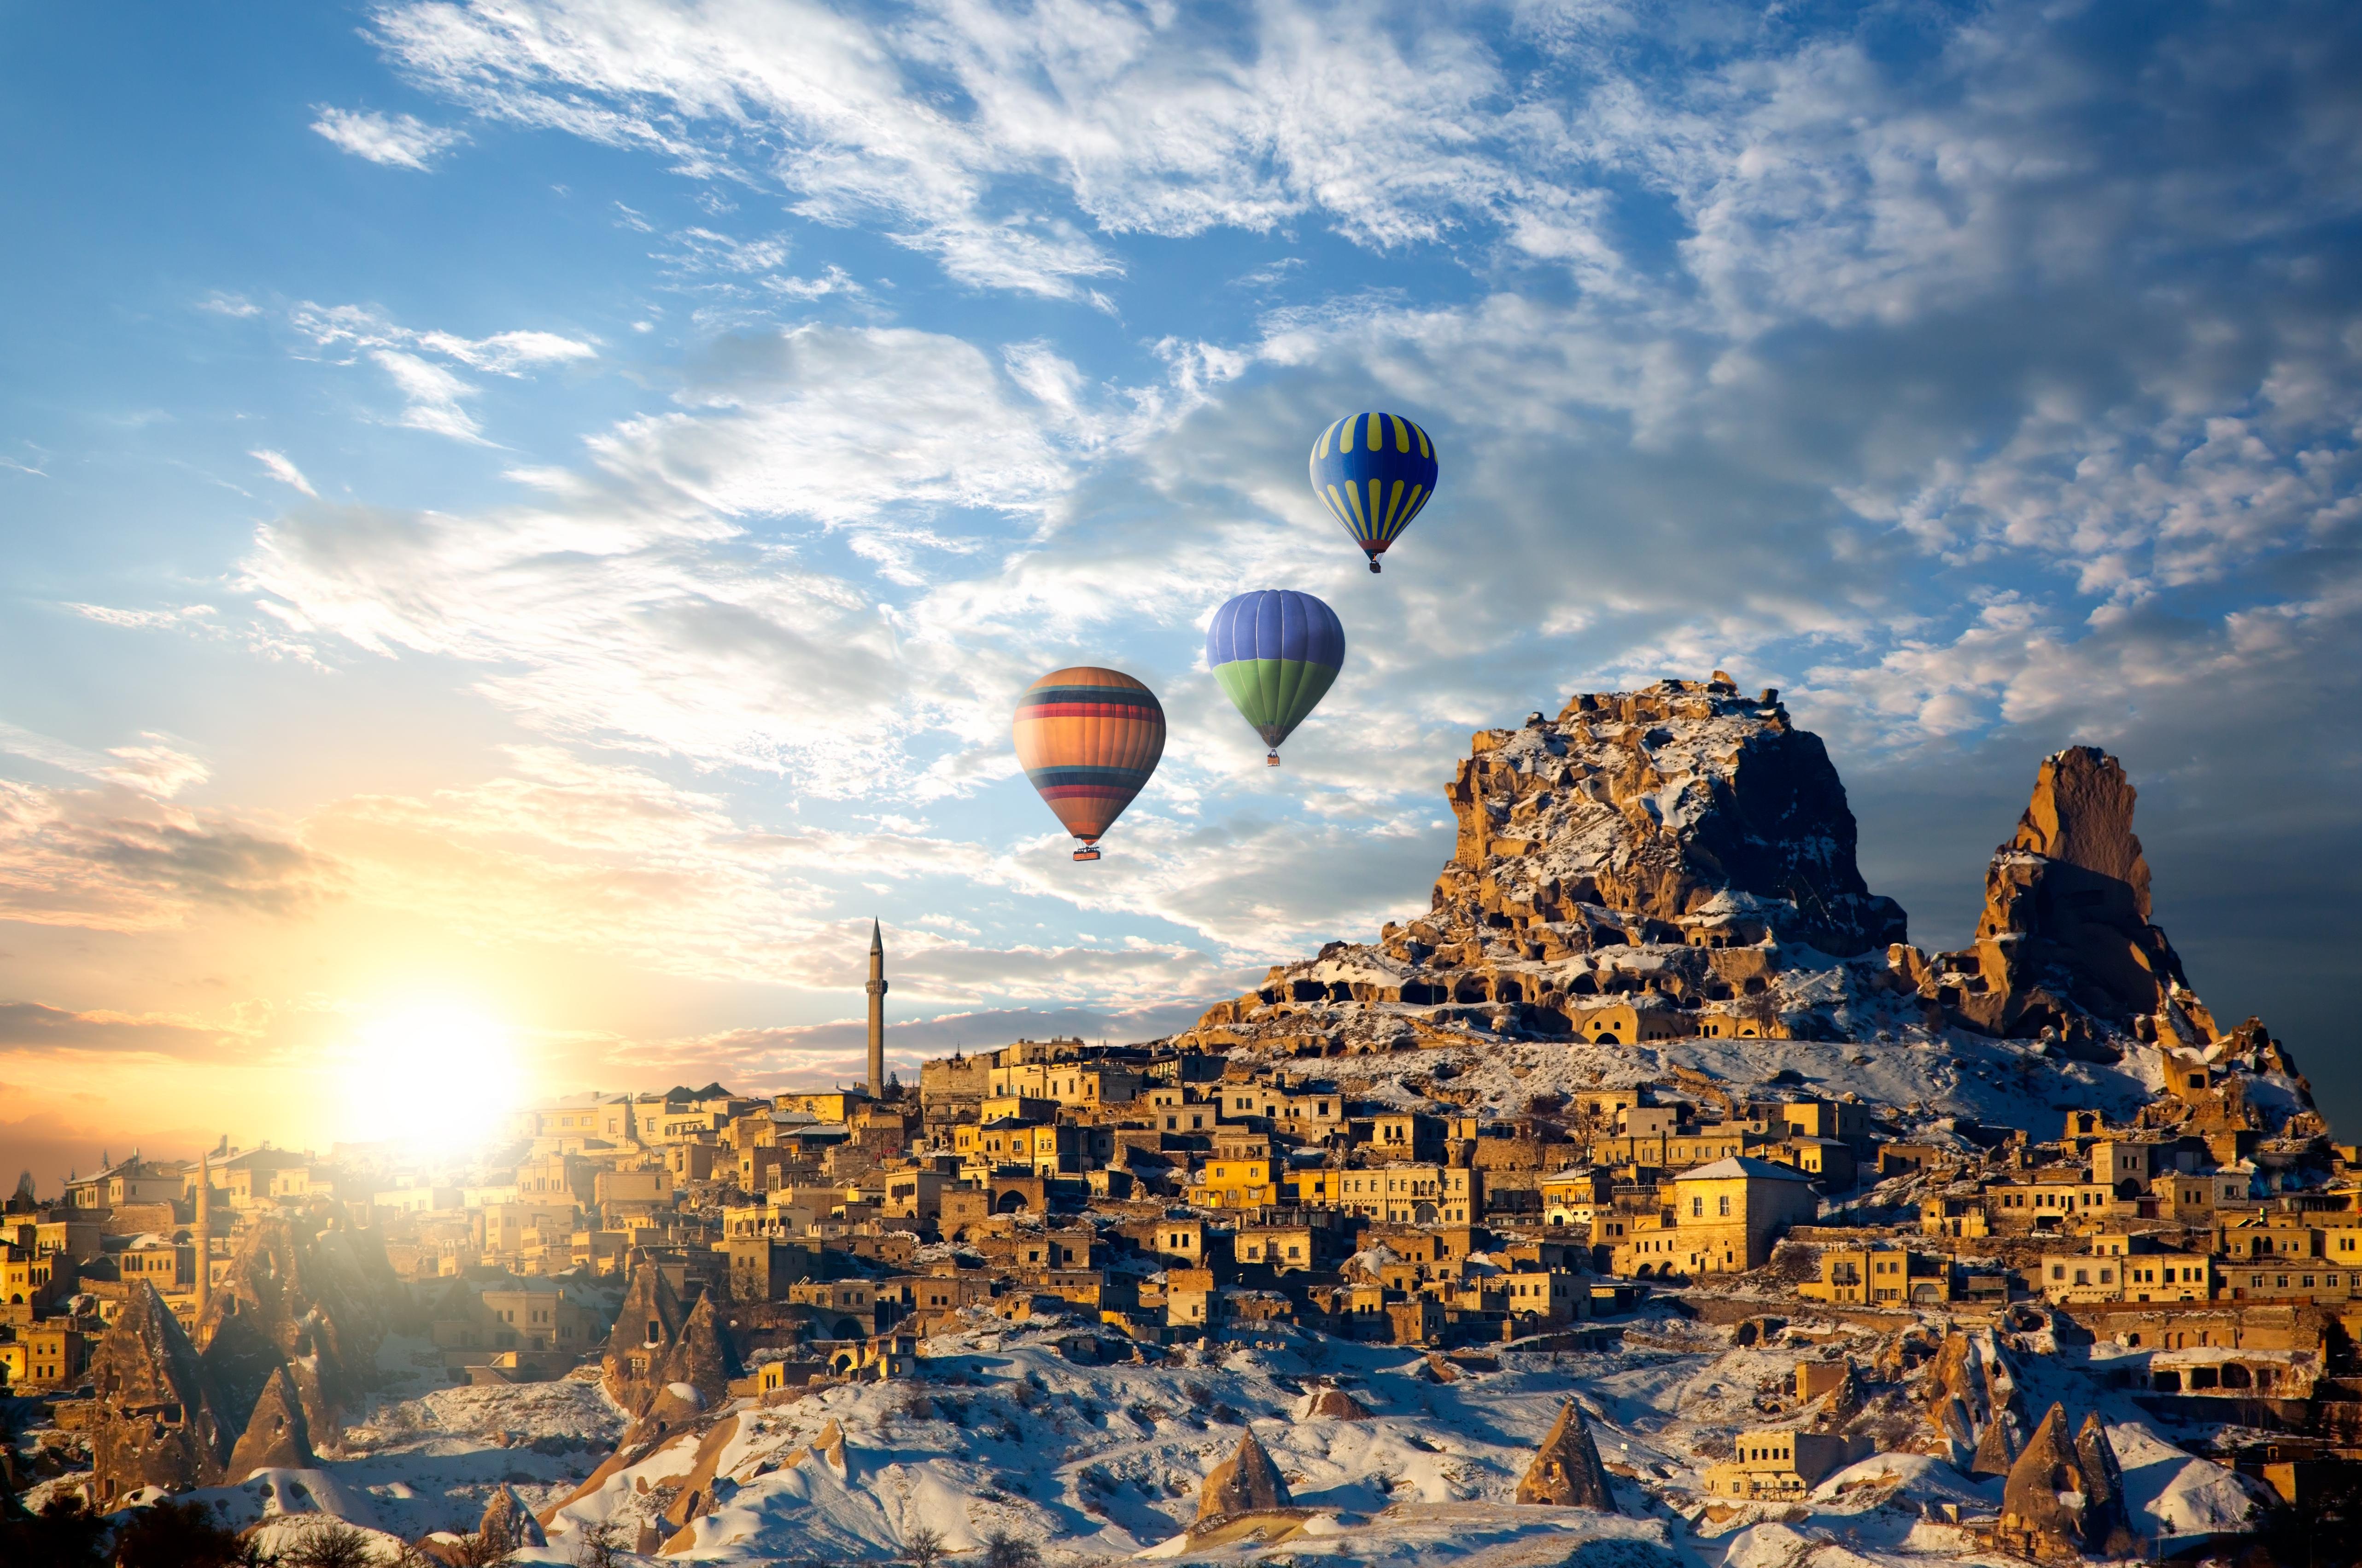 Cappadocia 4K wallpapers for your desktop or mobile screen free and easy to  download